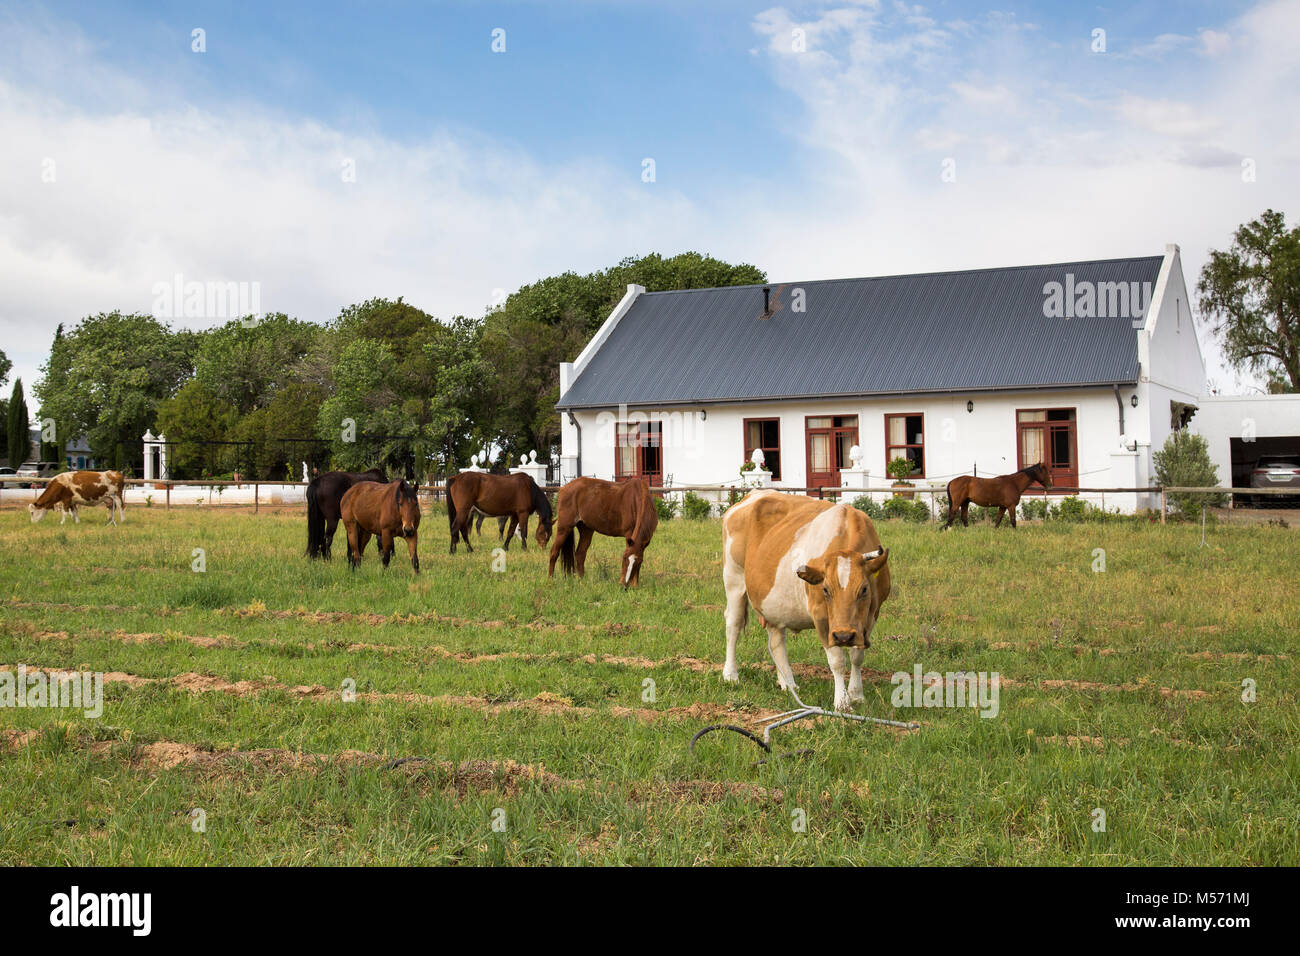 Farm yard with a dairy cow and small herd of horses Stock Photo